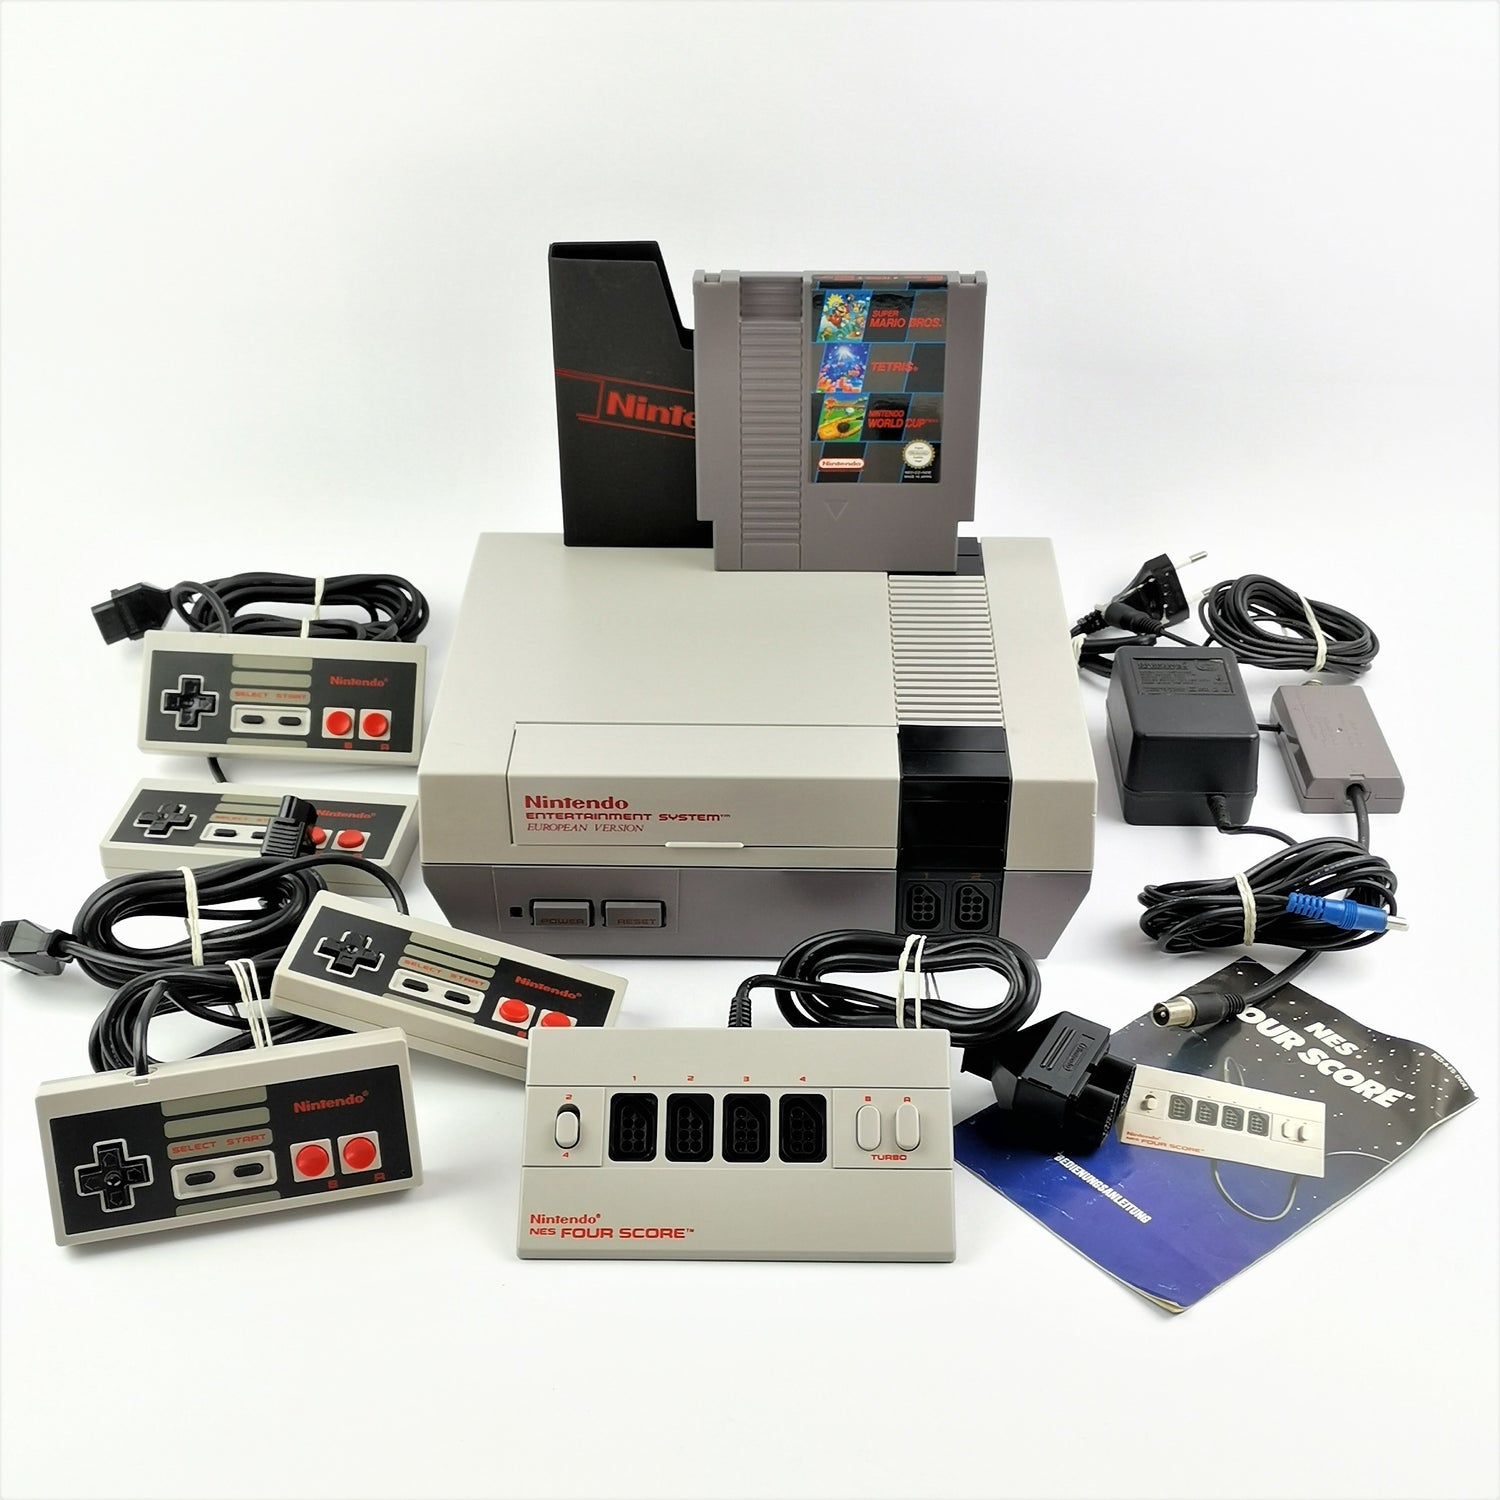 Nintendo NES console with 4 controllers, Four Score adapter, cable and 1 game